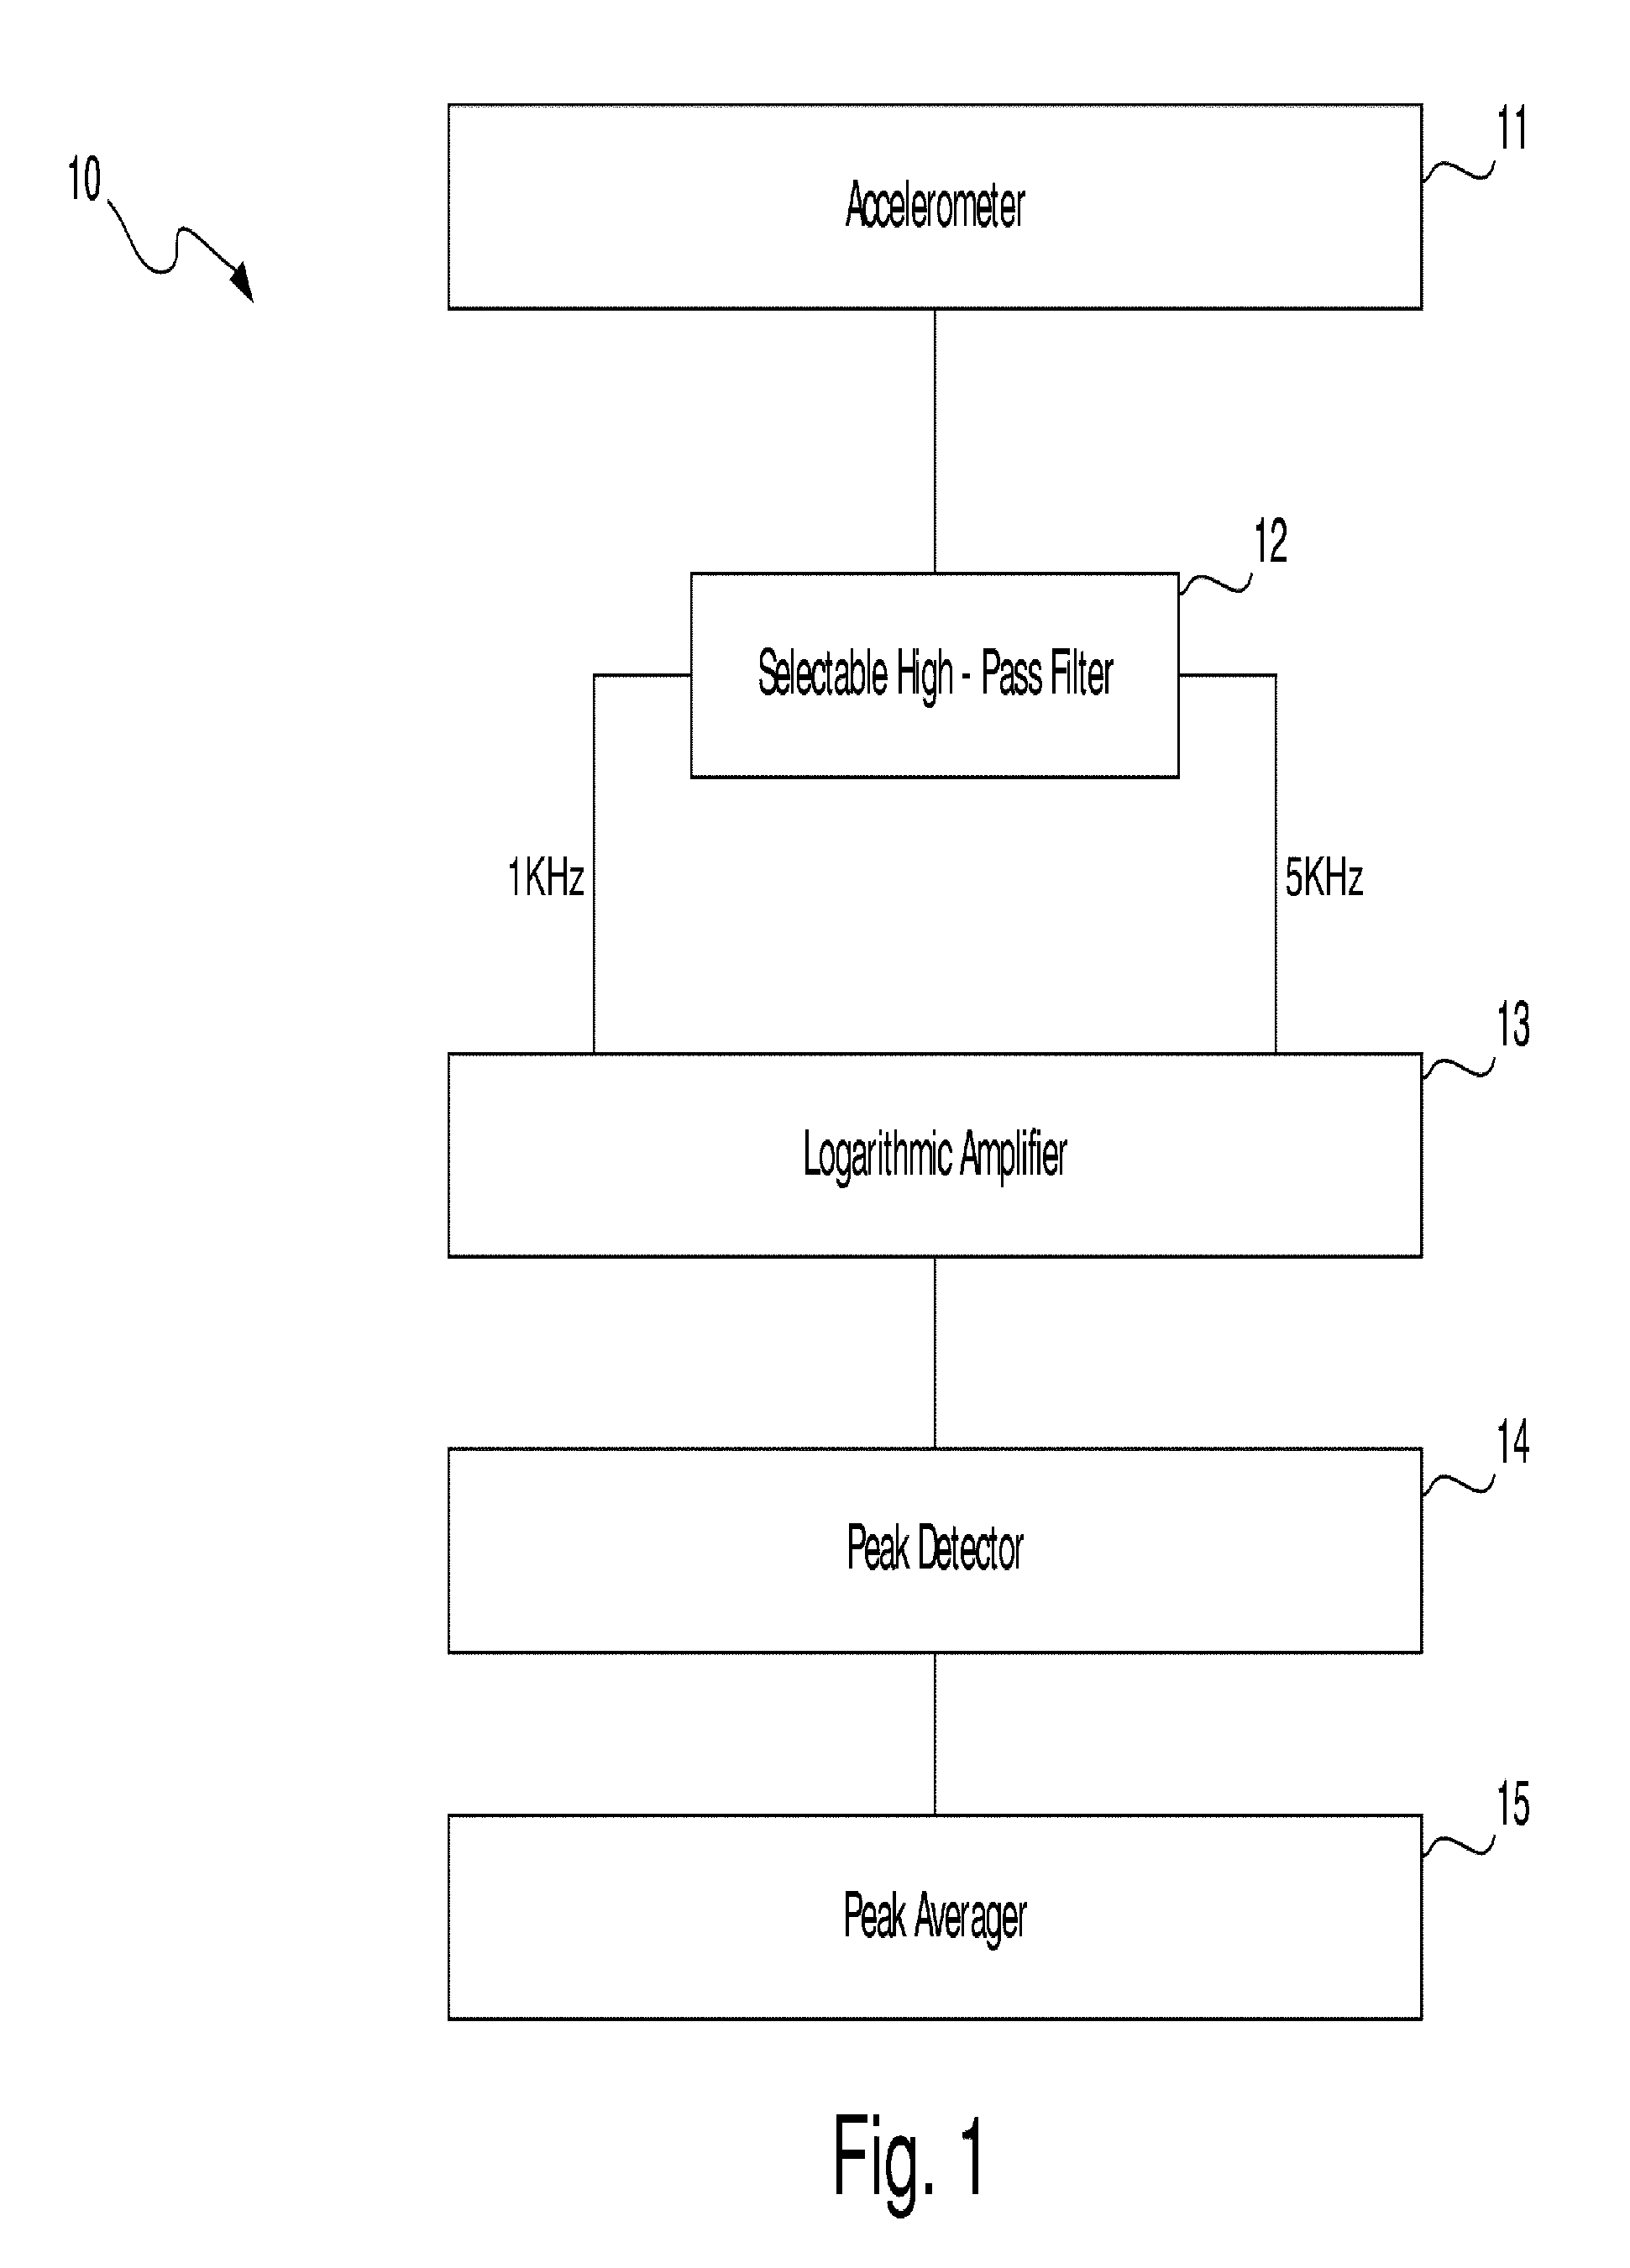 Method and apparatus for vibration sensing and analysis